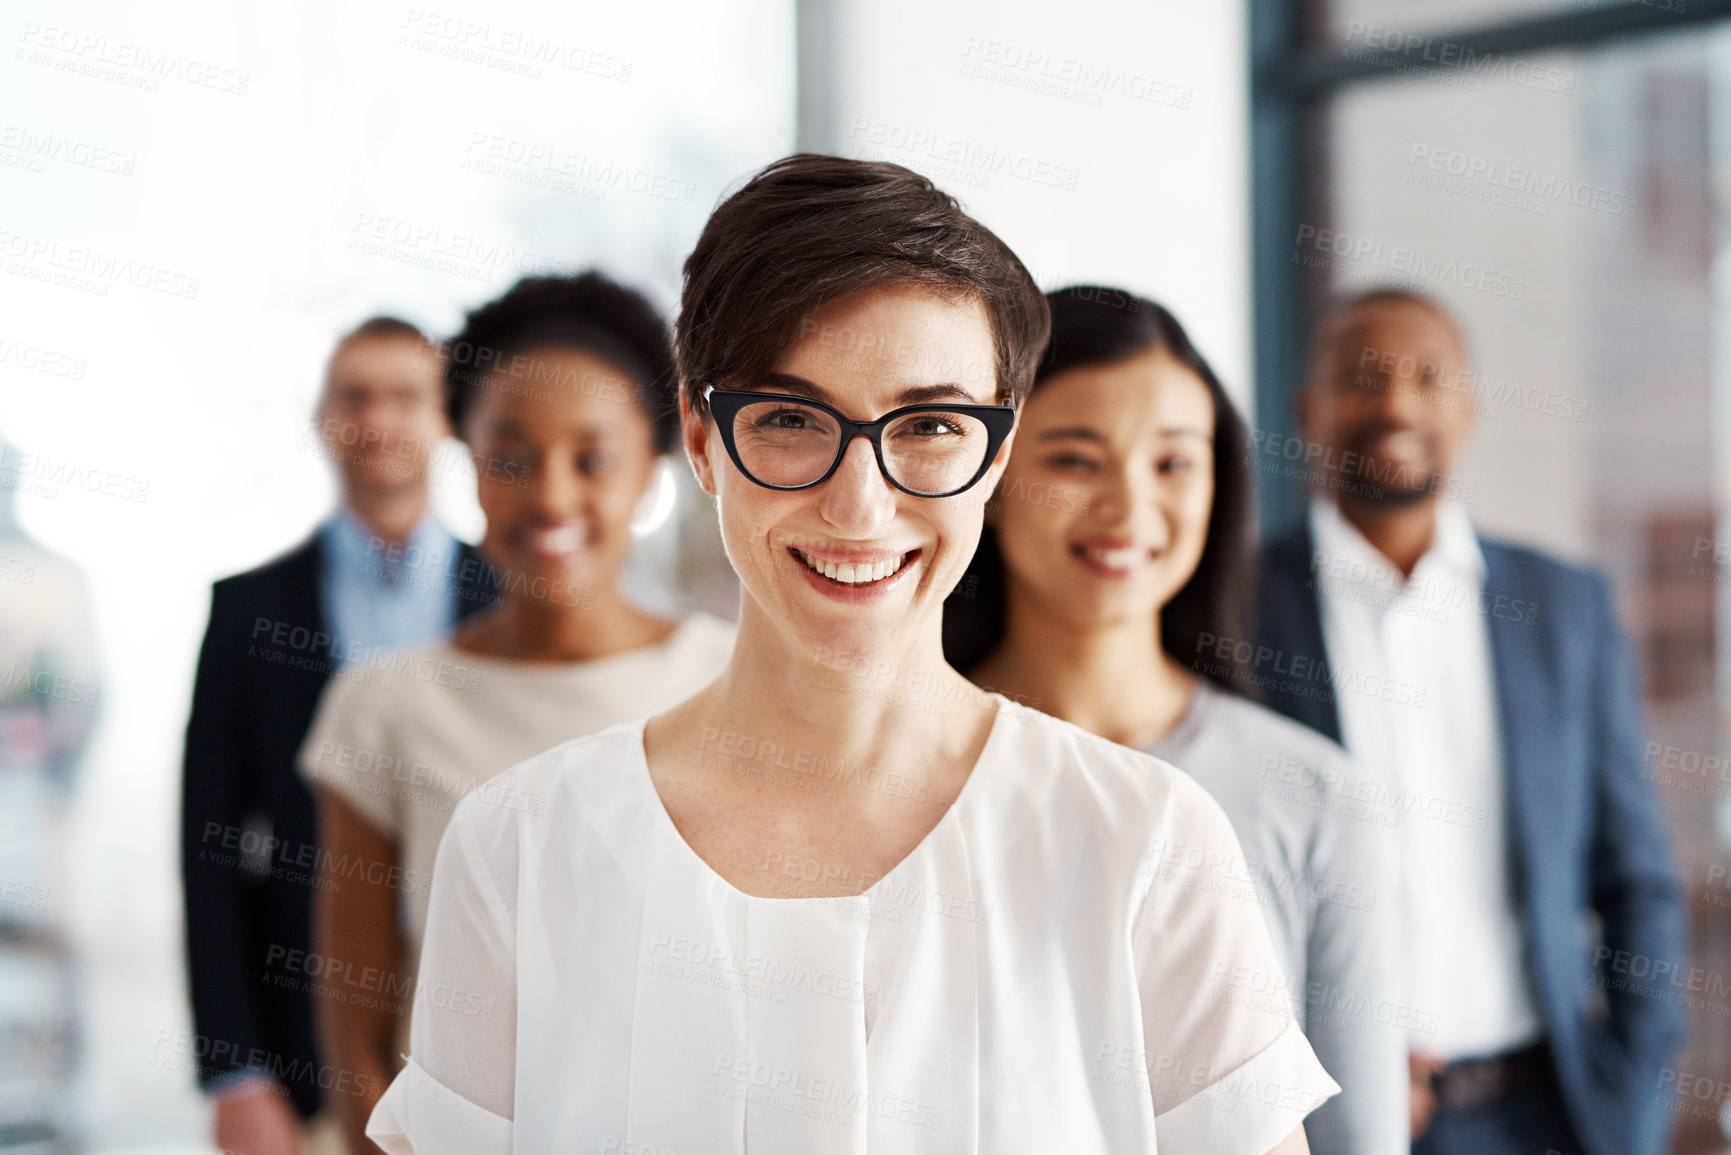 Buy stock photo A happy diverse group of smart and successful businesspeople with a satisfied leader or manager. Portrait of a team of corporate professionals smiling about company growth and development